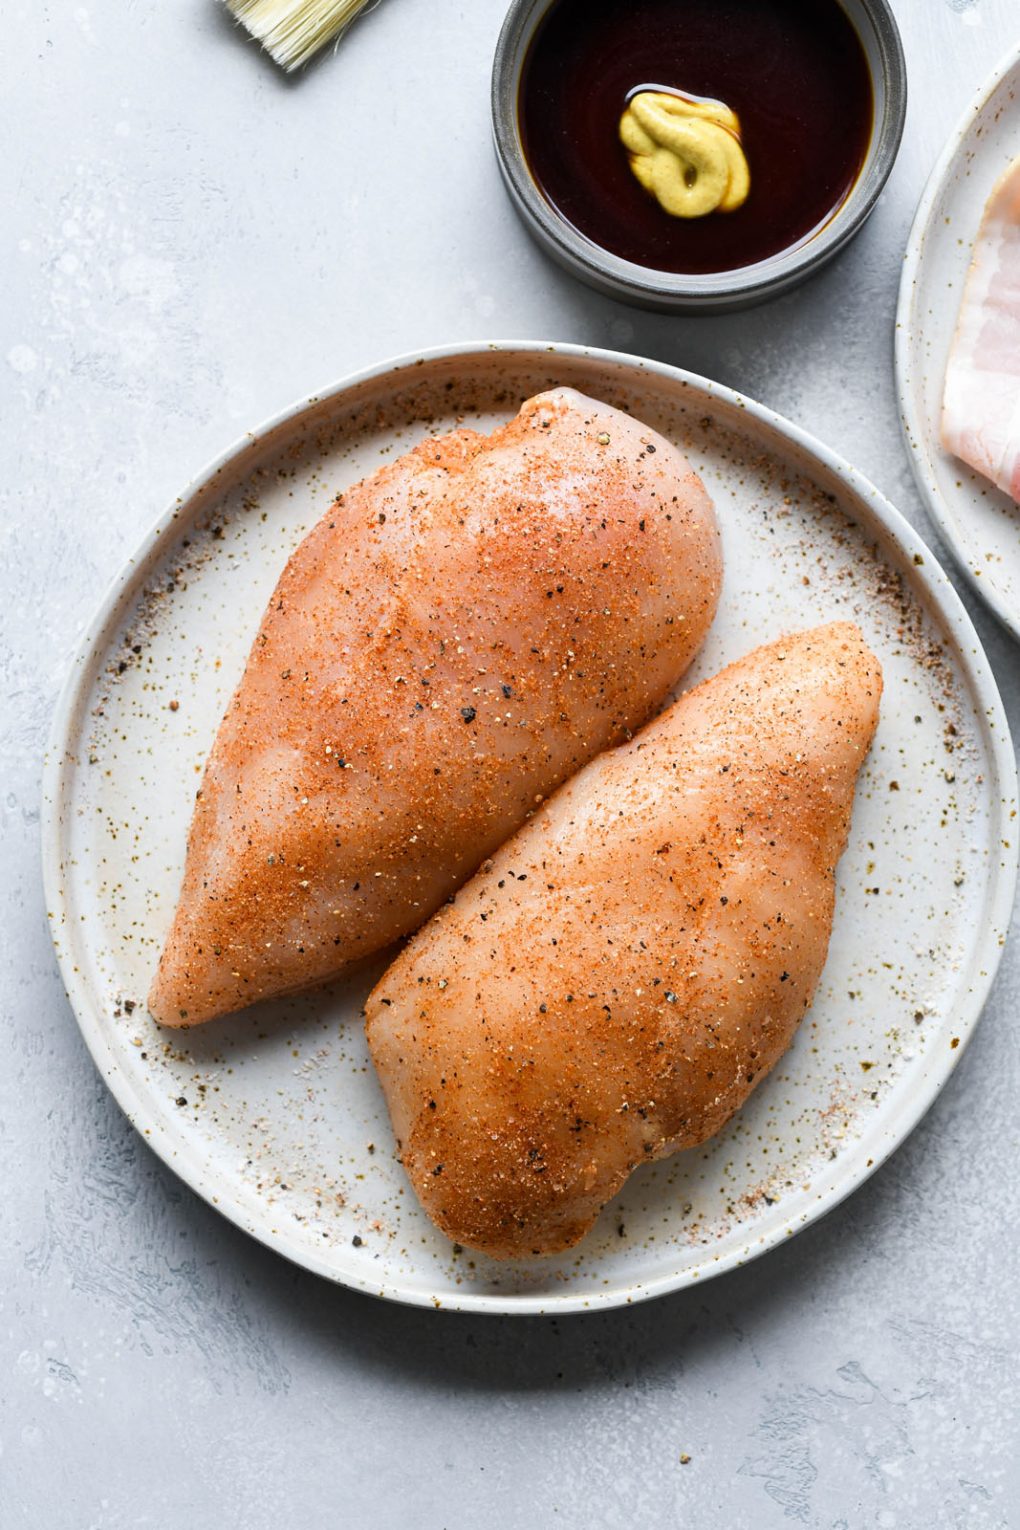 Image of two large raw chicken breasts coated in a spice mix, on a light colored plate - on a light background.